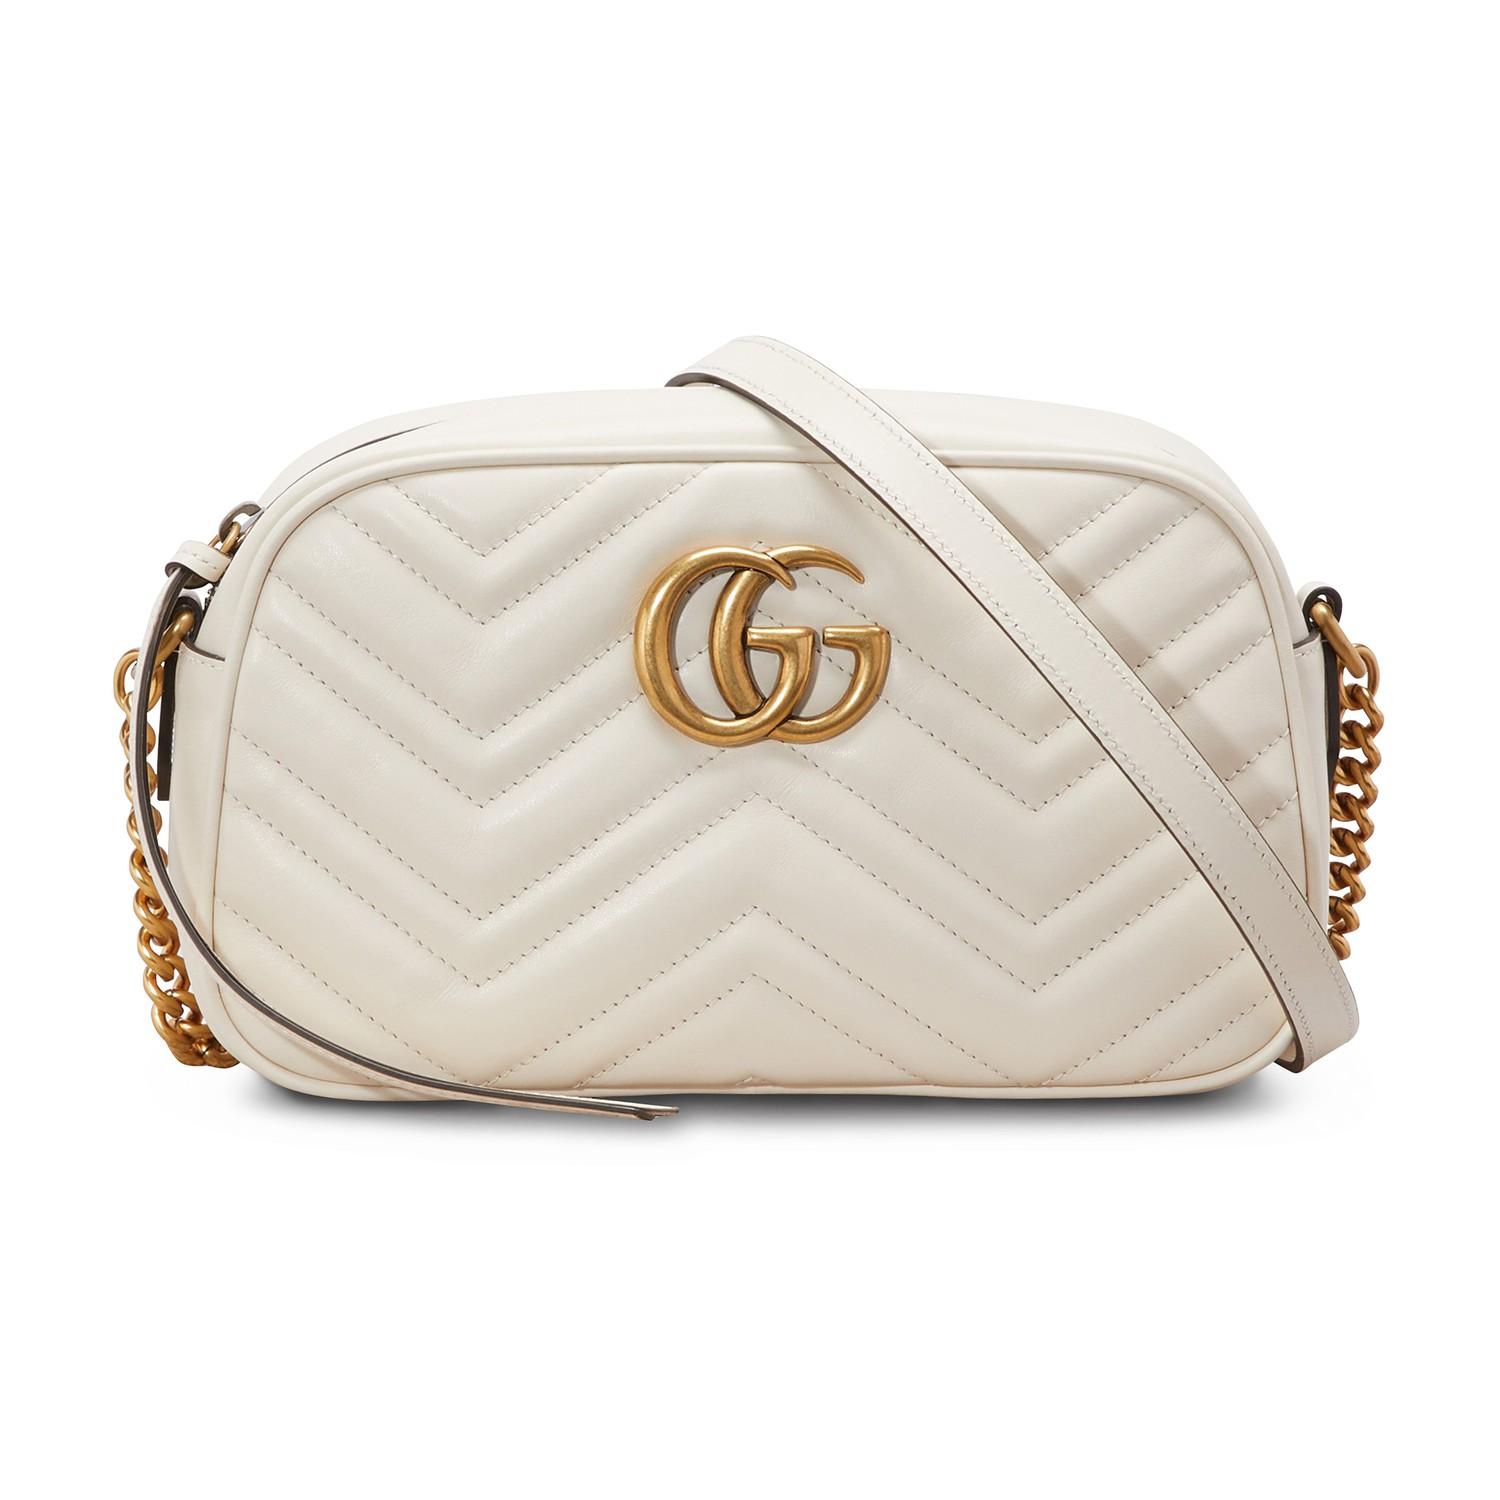 Gucci Leather GG Marmont Matelassé Shoulder Bag in White - Lyst